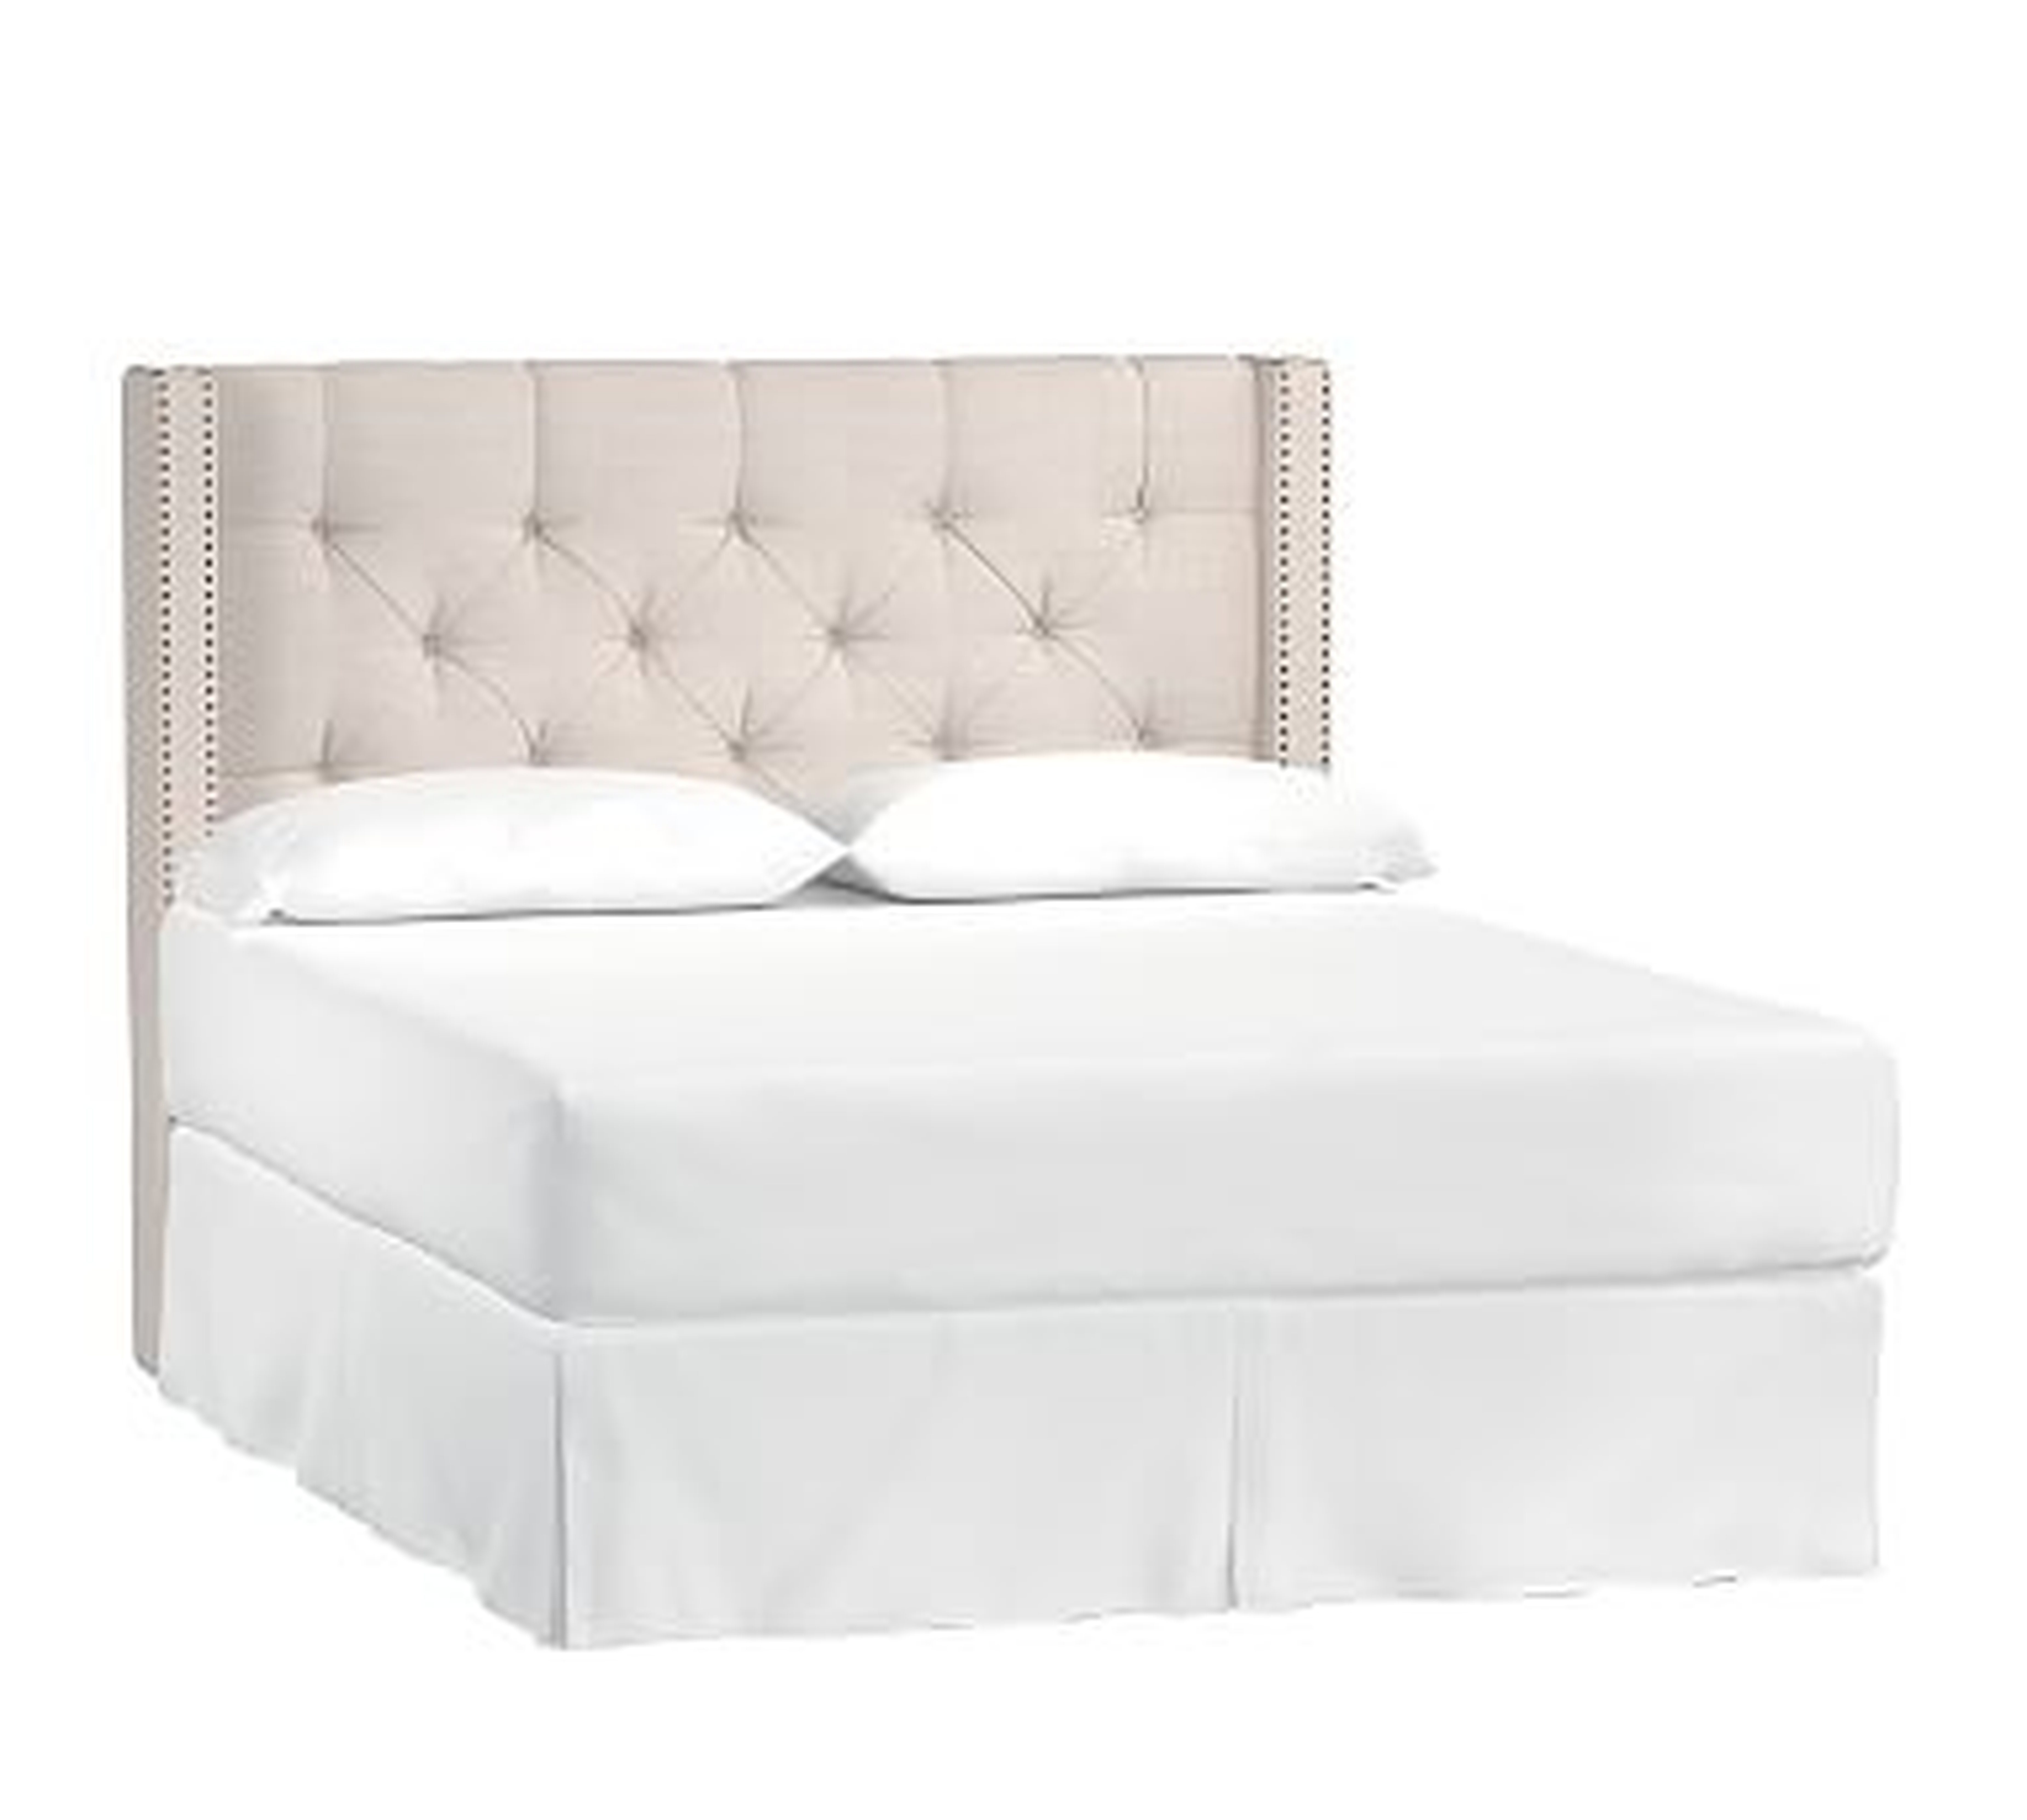 Harper Upholstered Tufted Low Headboard with Pewter Nailheads, King, Performance Twill Warm White - Pottery Barn